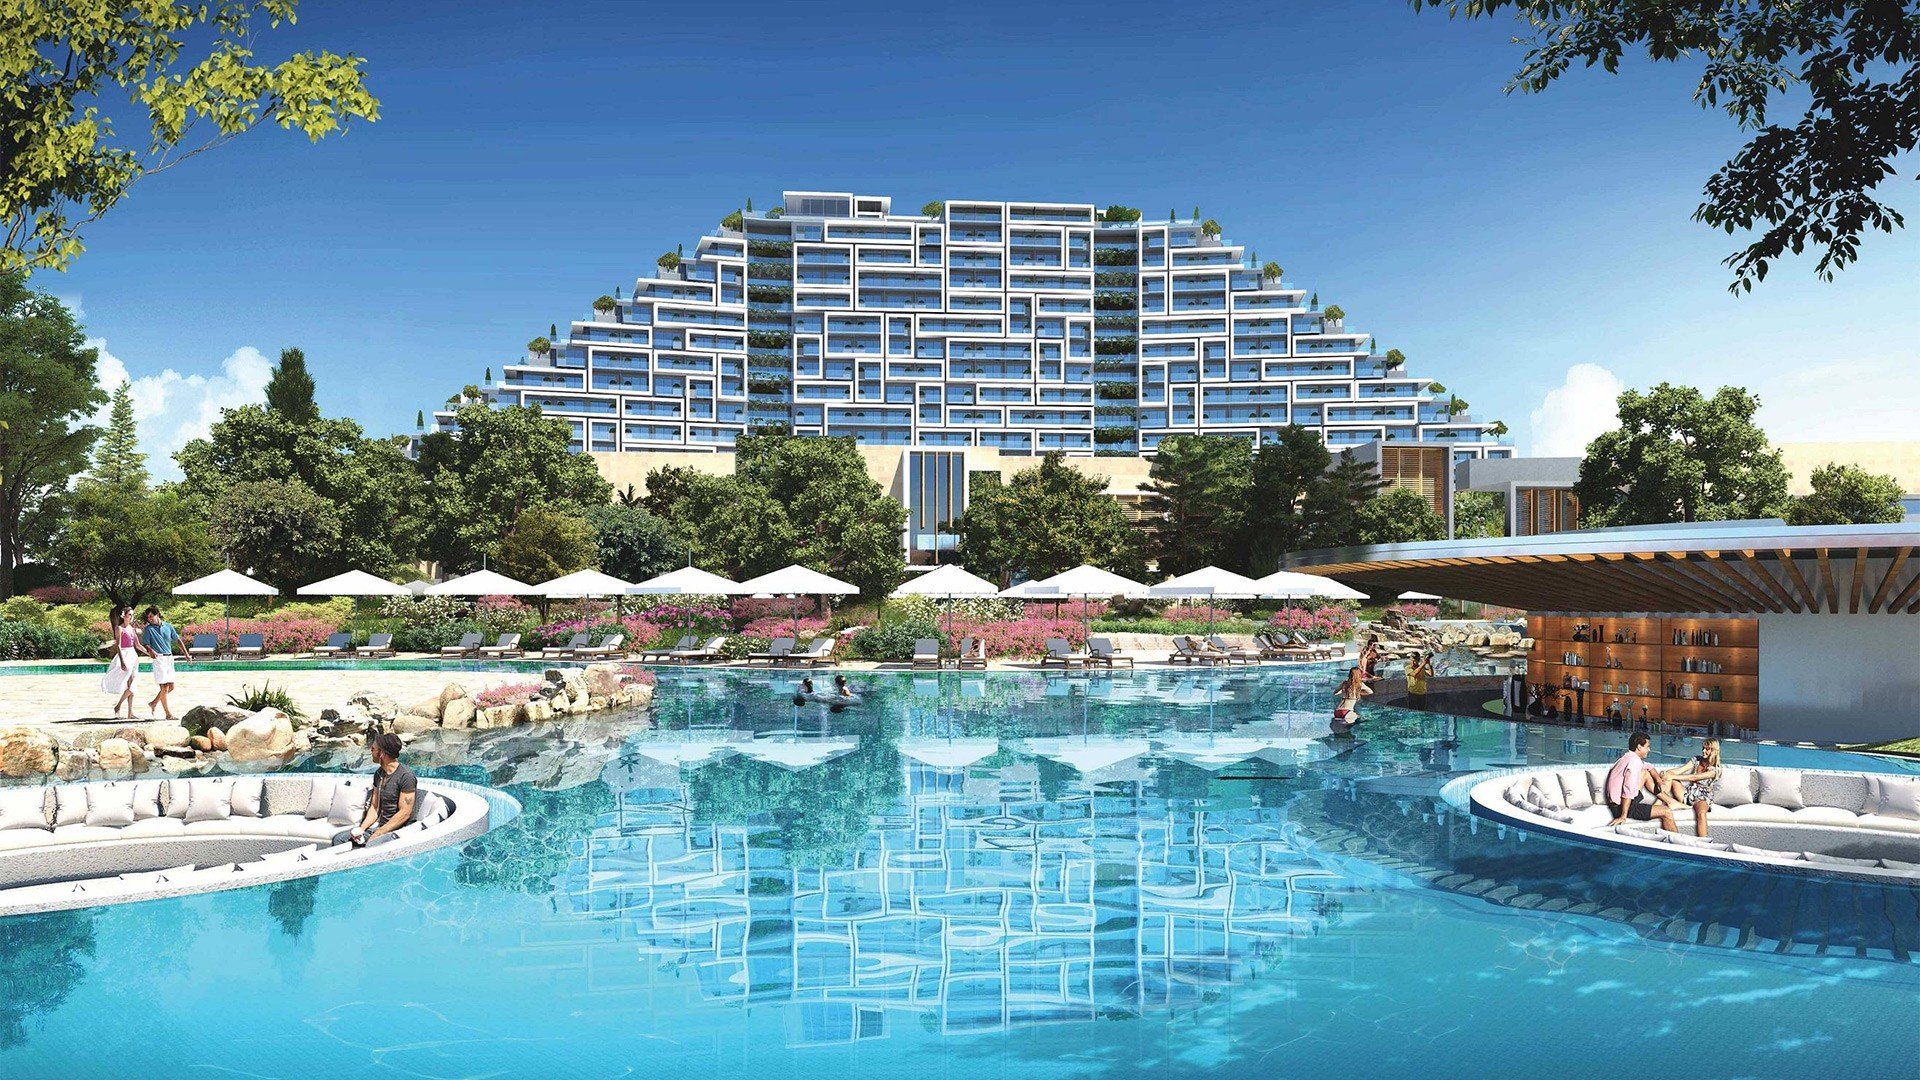 Cyprus: Melco's City of Dreams Mediterranean opening delayed until Q2 2023